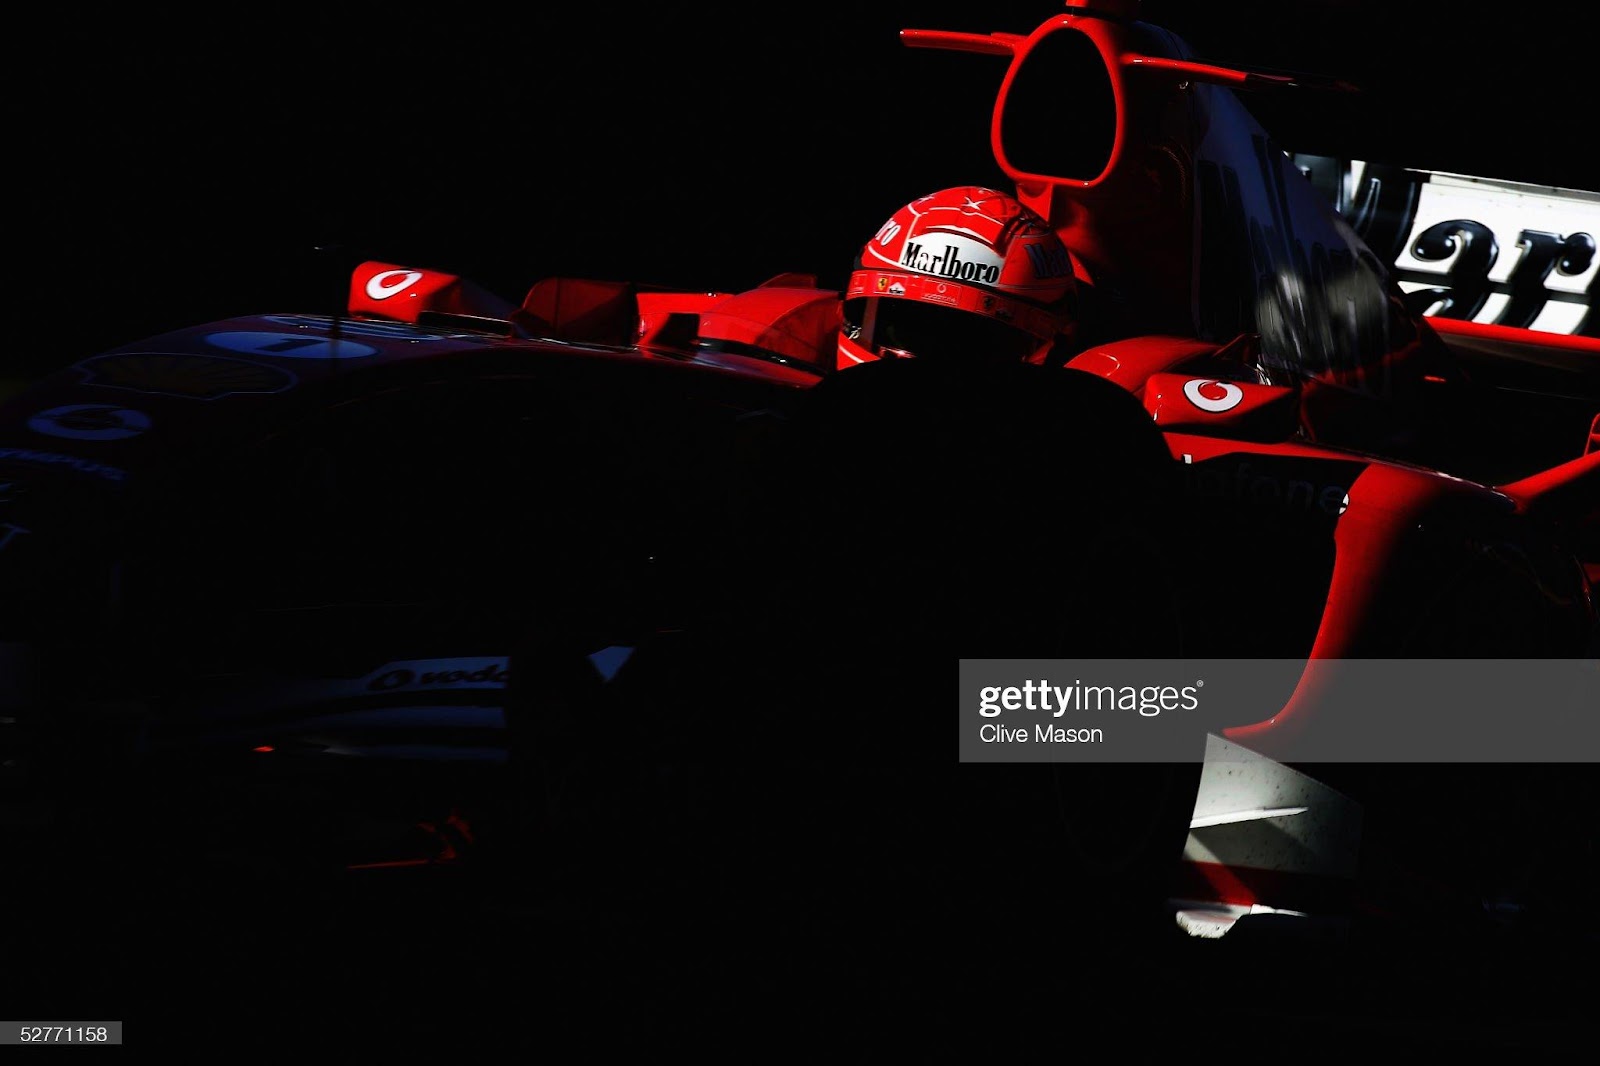 Michael Schumacher, Ferrari, in action during practice prior to qualifying for the F1 Spanish Grand Prix at the Circuit de Catalunya on May 7, 2005 in Barcelona, Spain. 